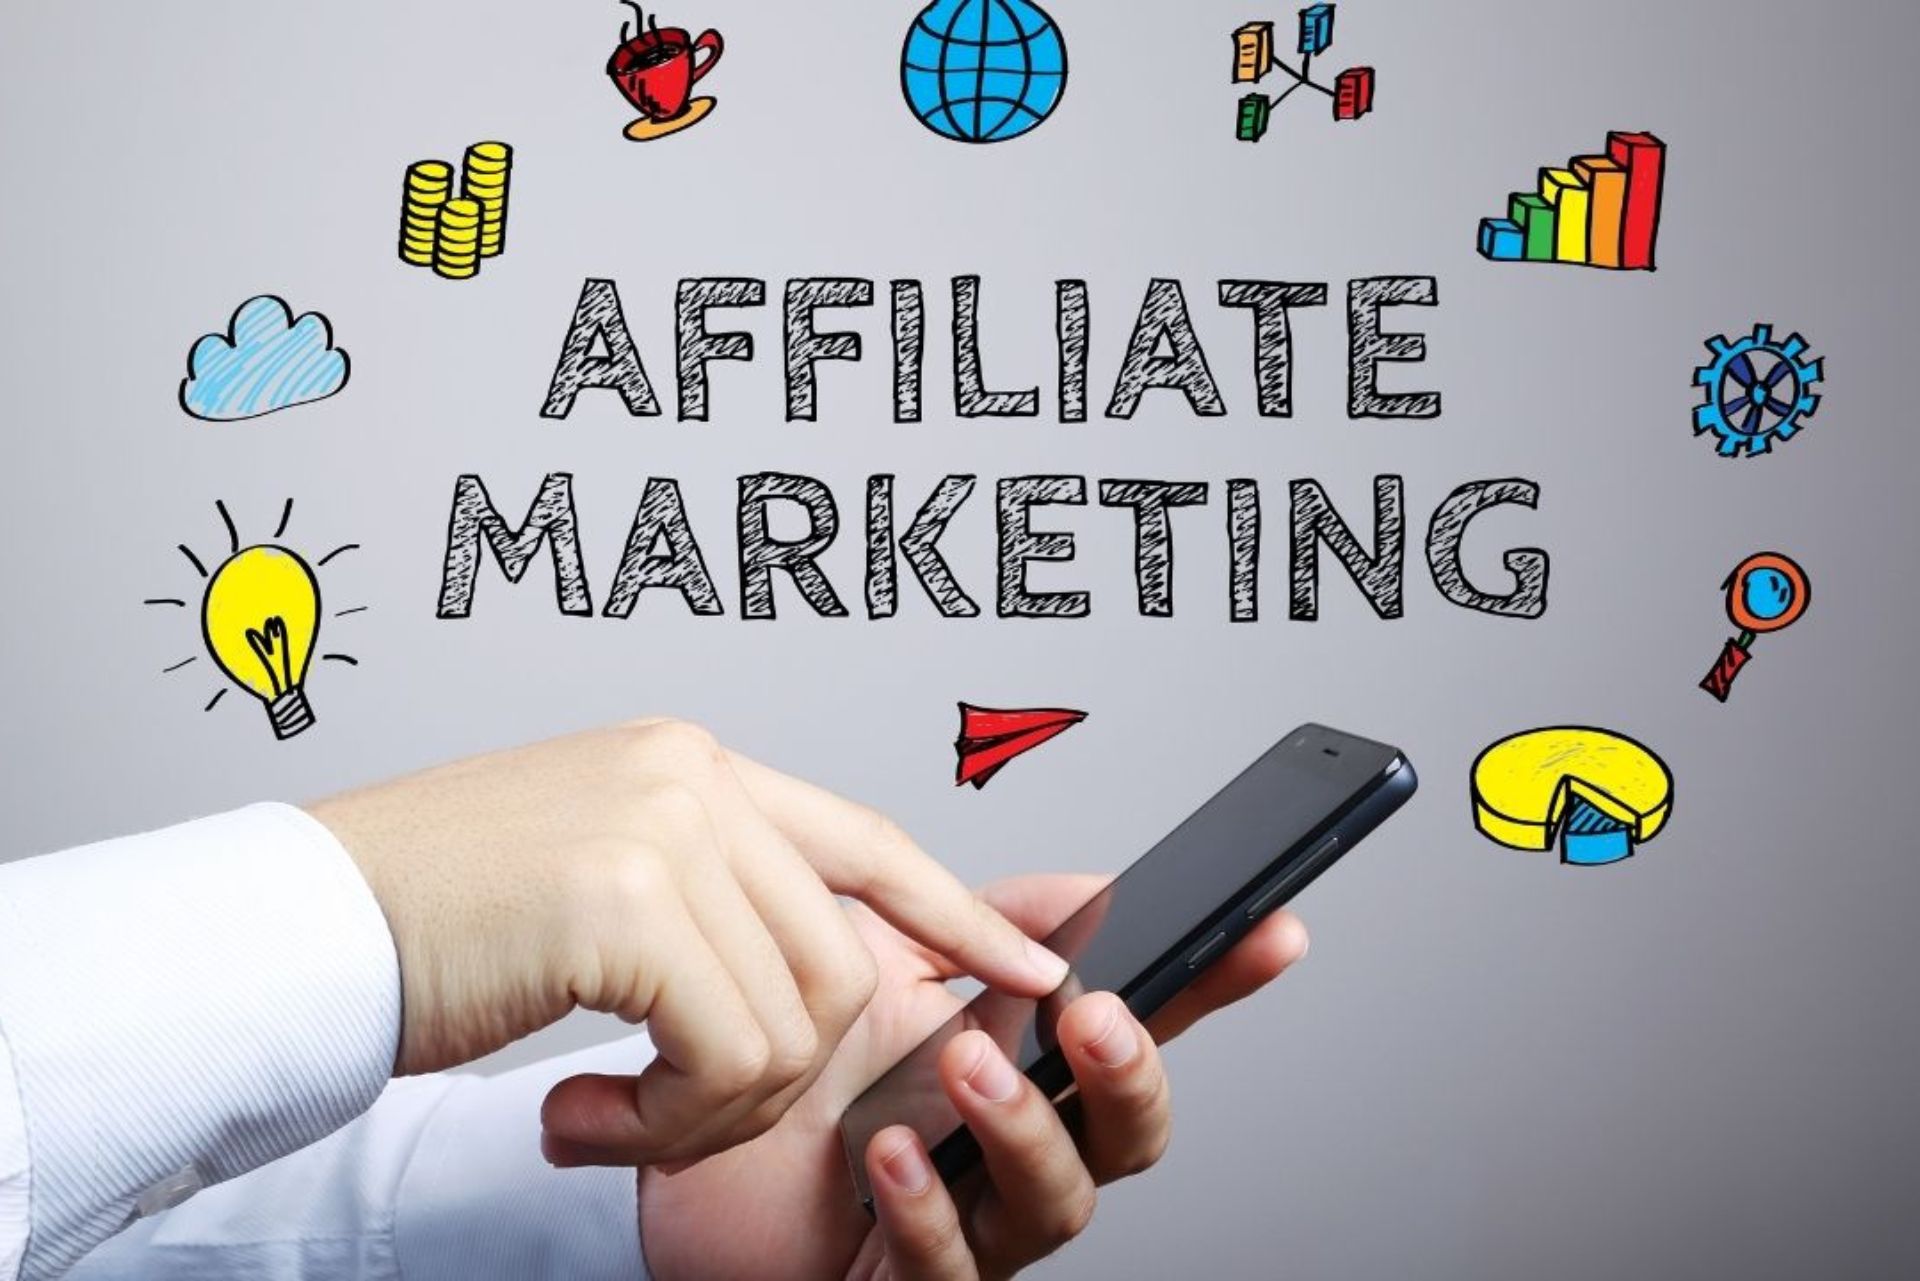 The Hidden Path to Unlocking the Power of Affiliate Marketing Influencers